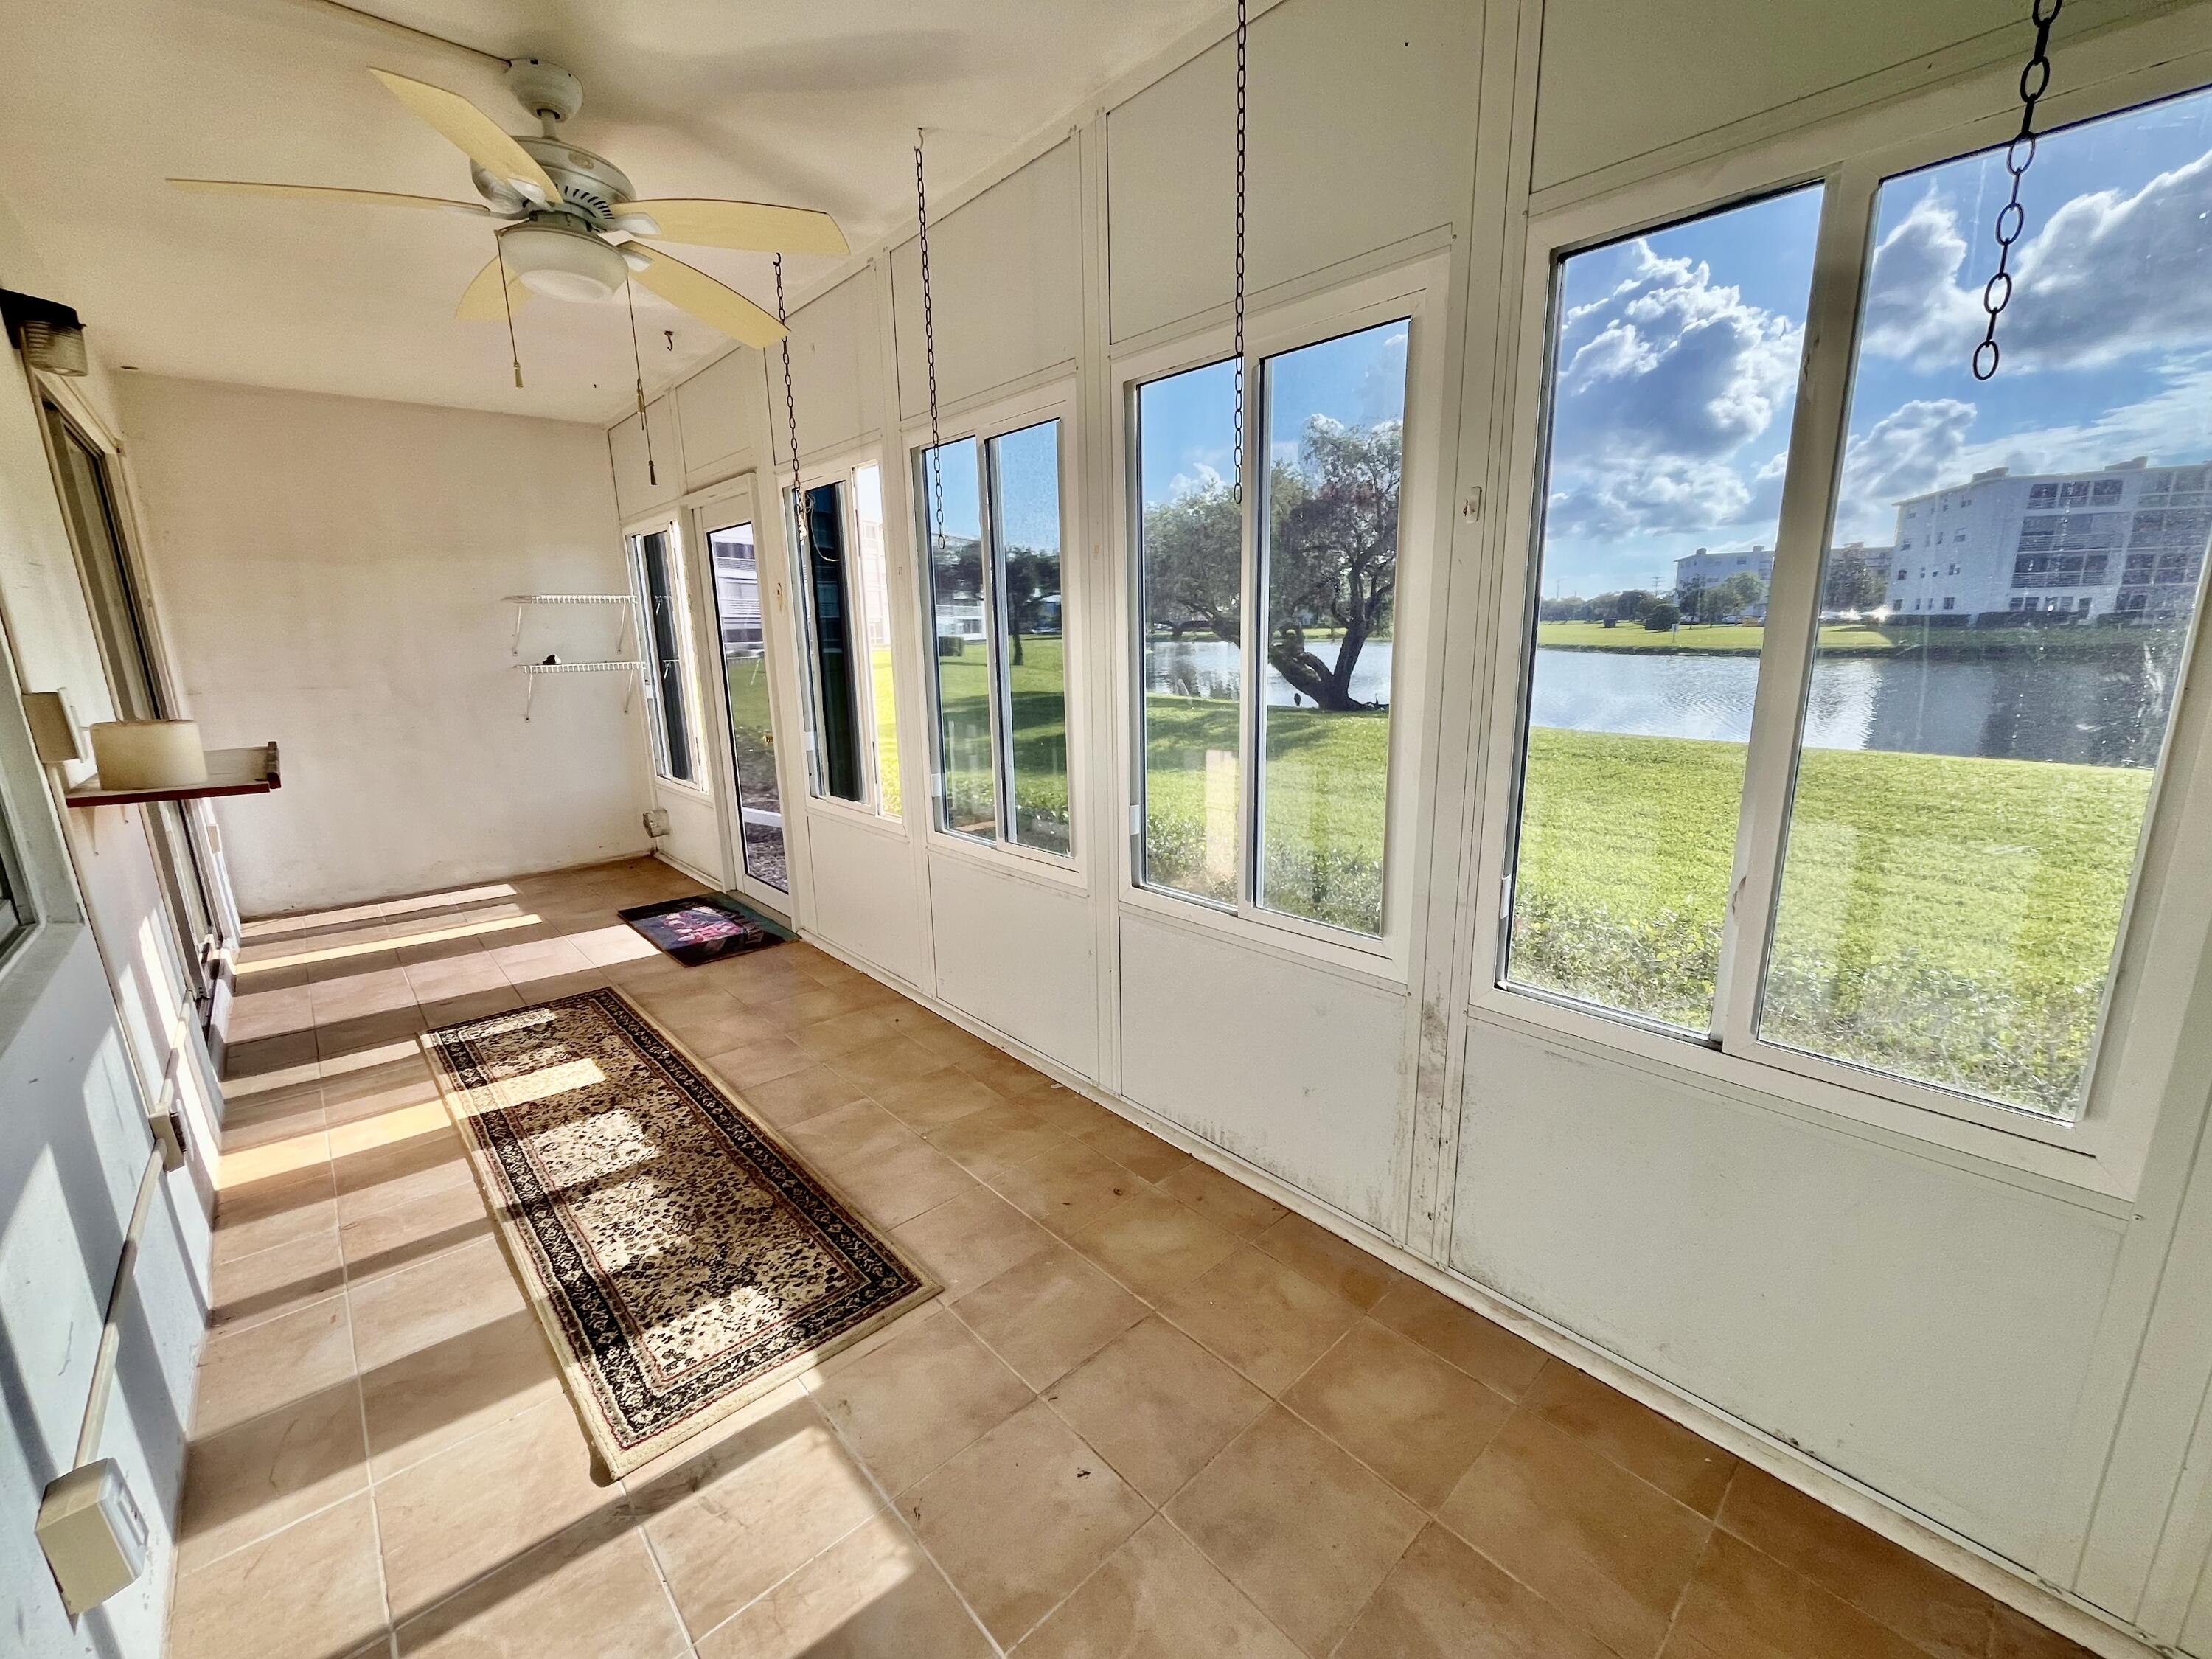 Property for Sale at 1021 Guildford B Drive 1021, Boca Raton, Palm Beach County, Florida - Bedrooms: 2 
Bathrooms: 1.5  - $164,500